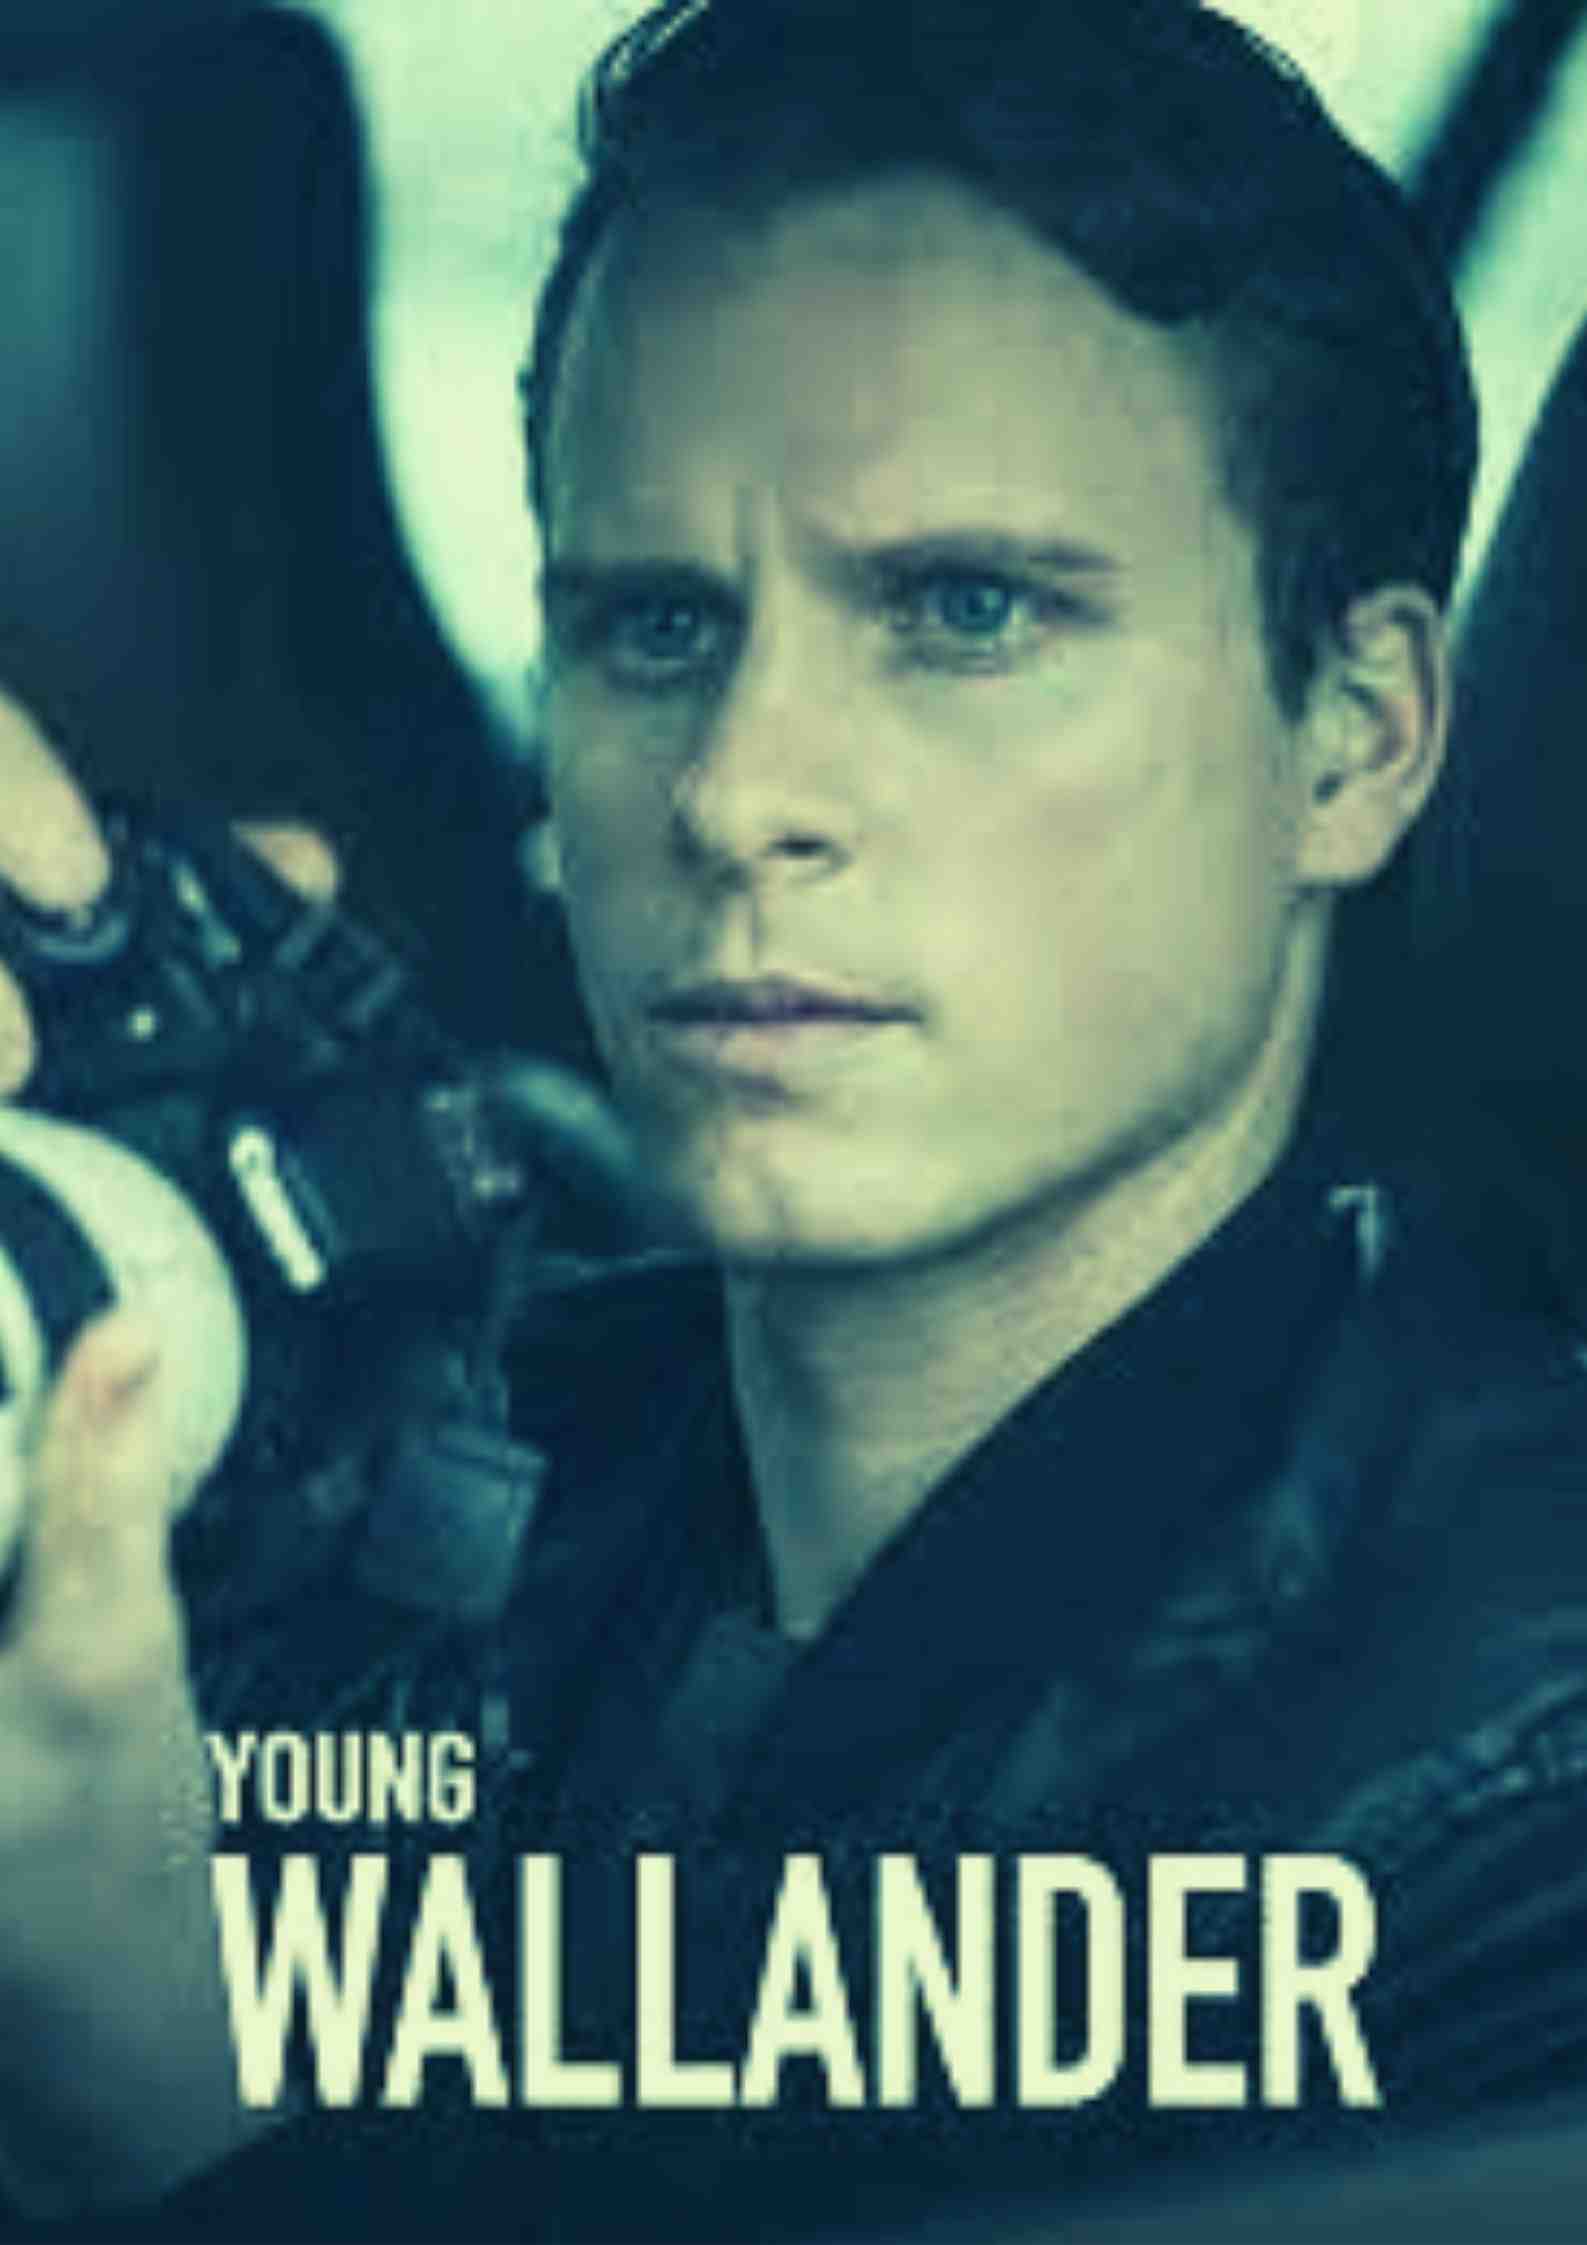 Young Wallander parents guide | age rating | 2022